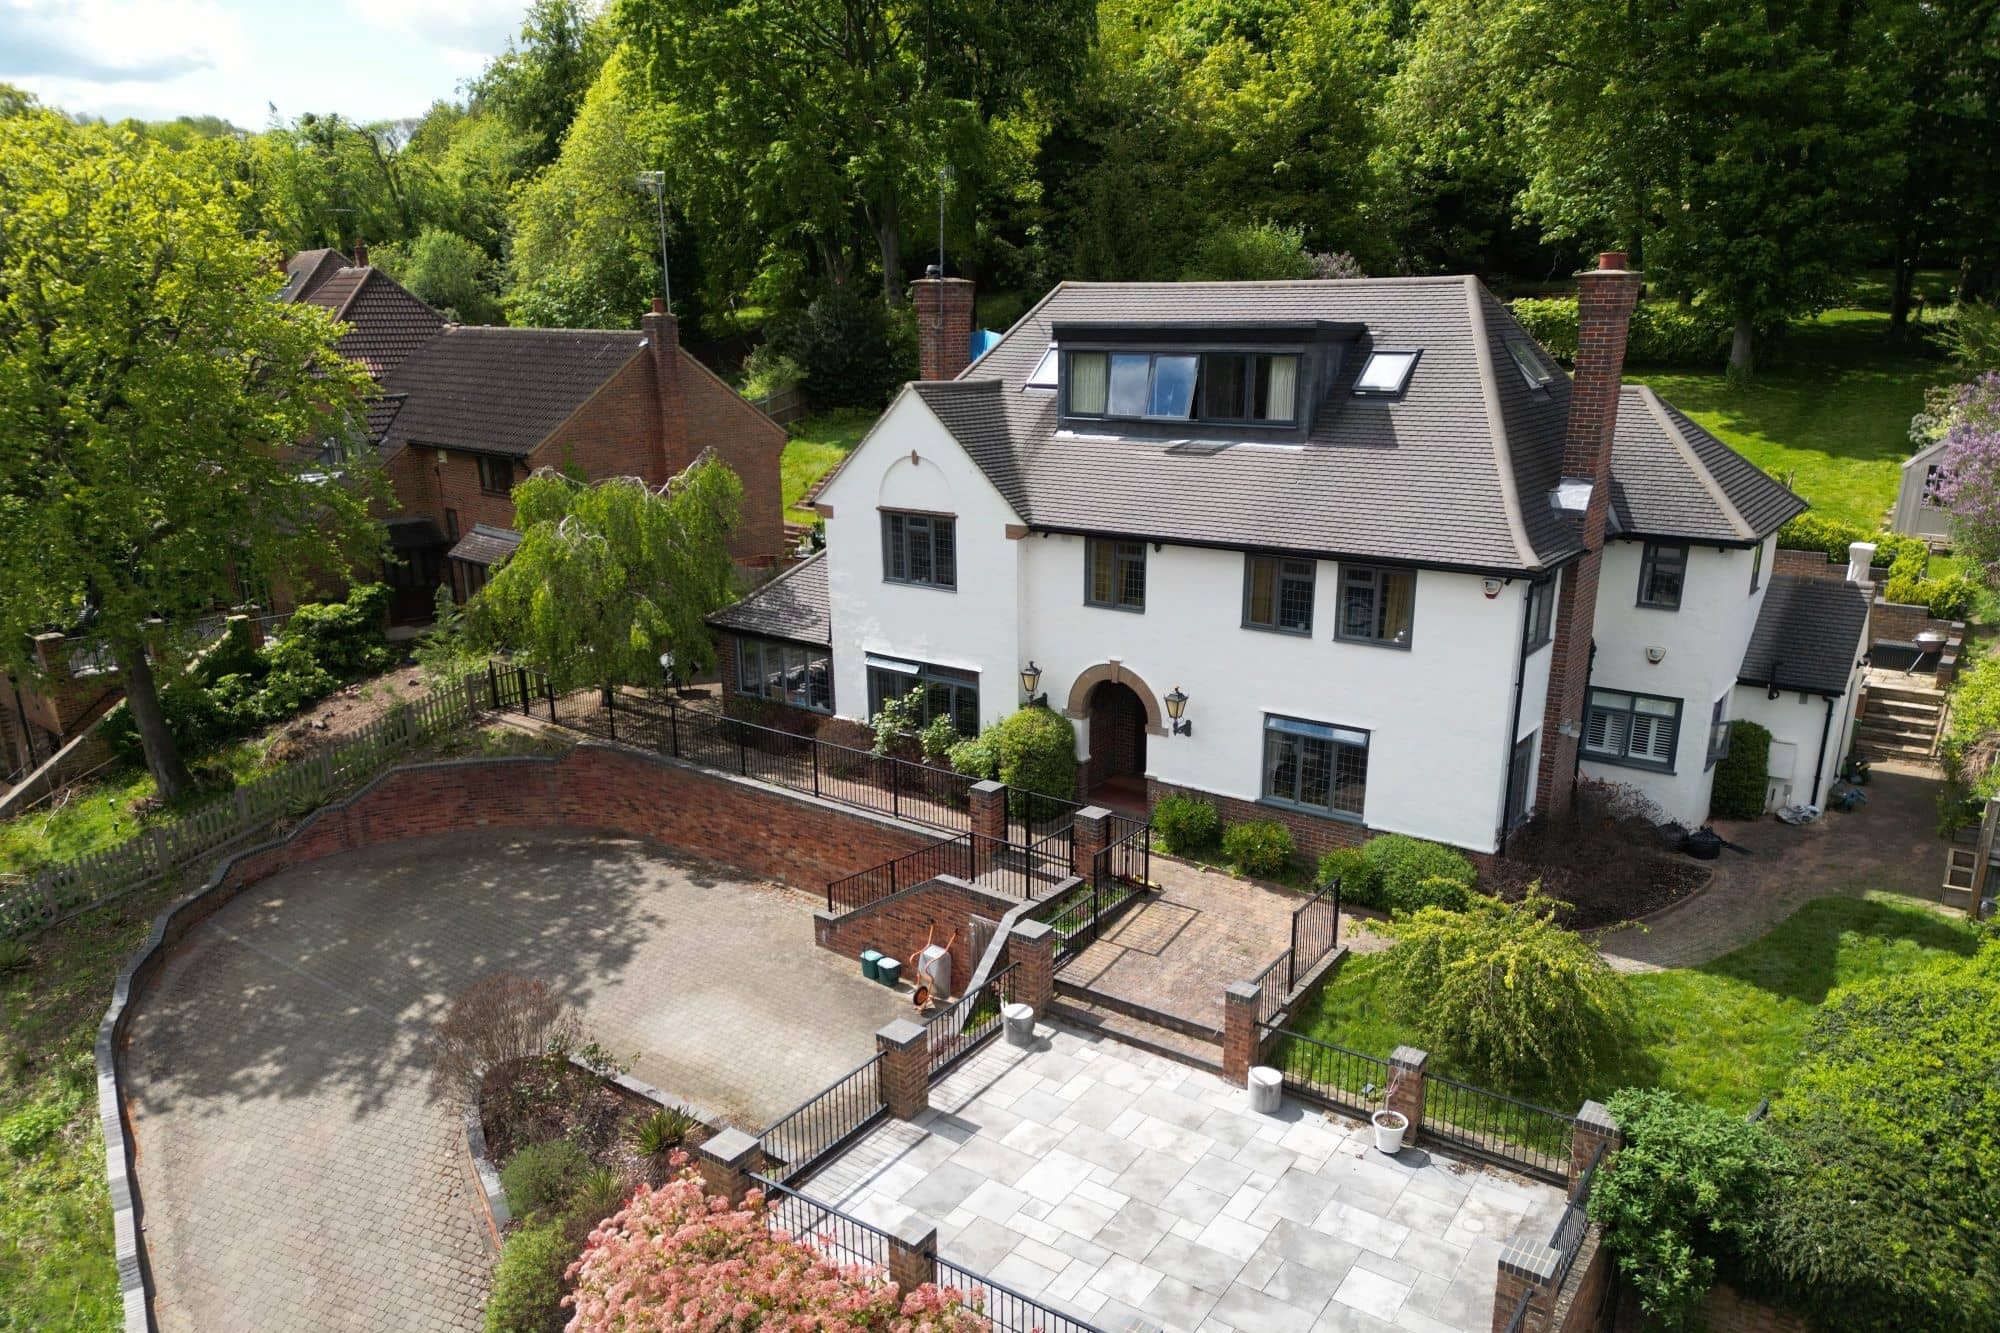 Aerial view of modern house with lush green garden in Hertfordshire